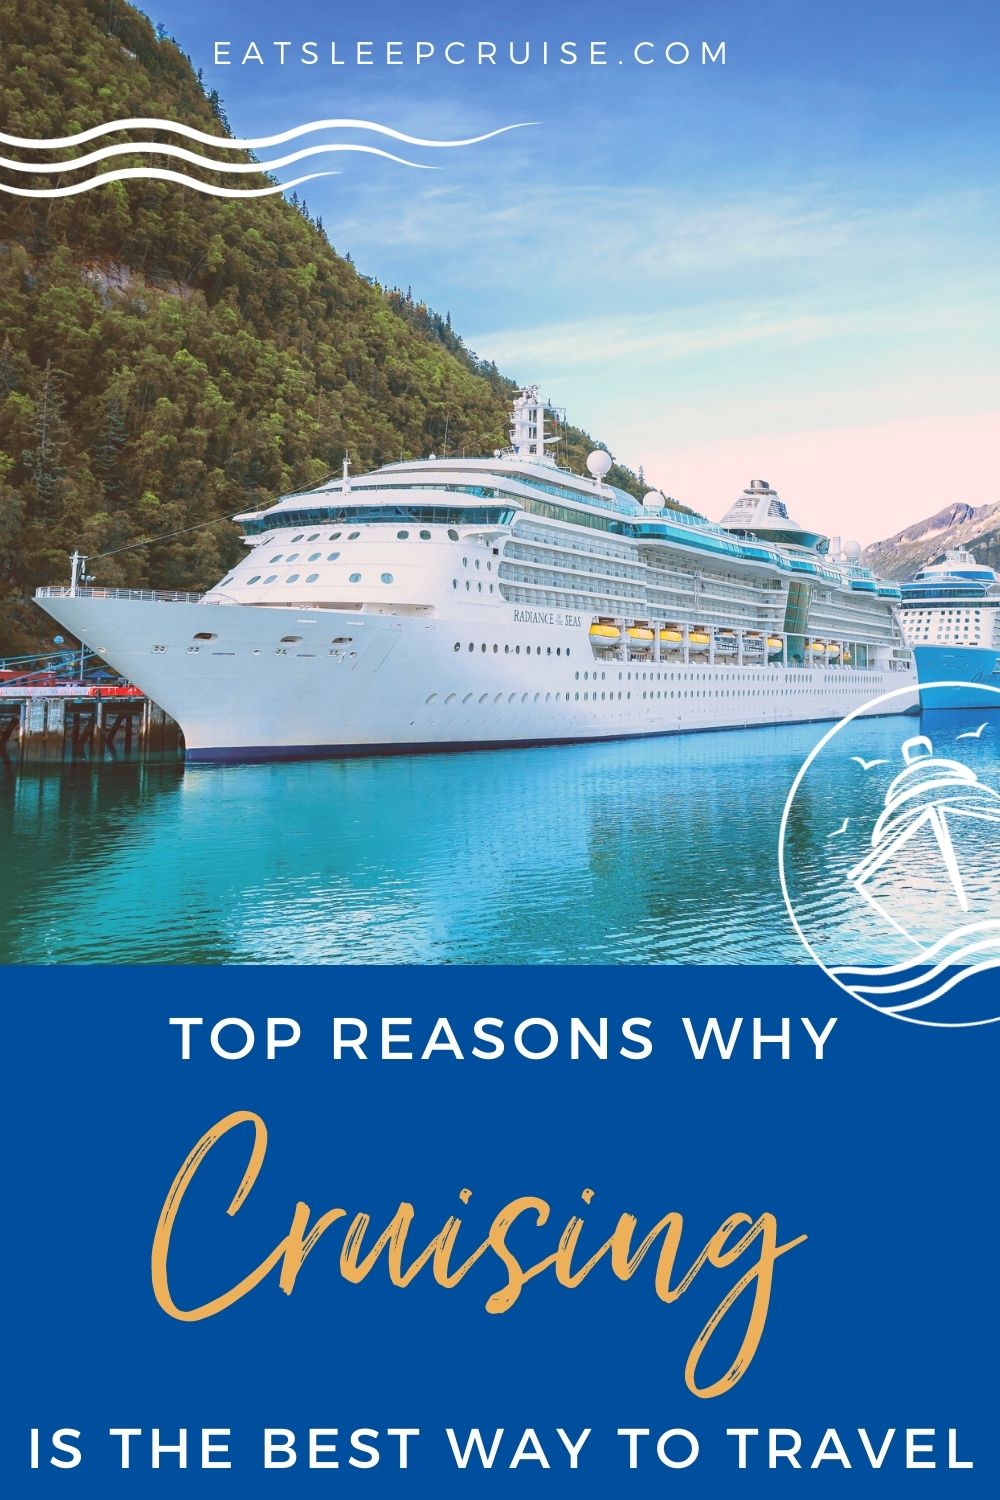 Top Reasons Cruising is the Best Way to Travel